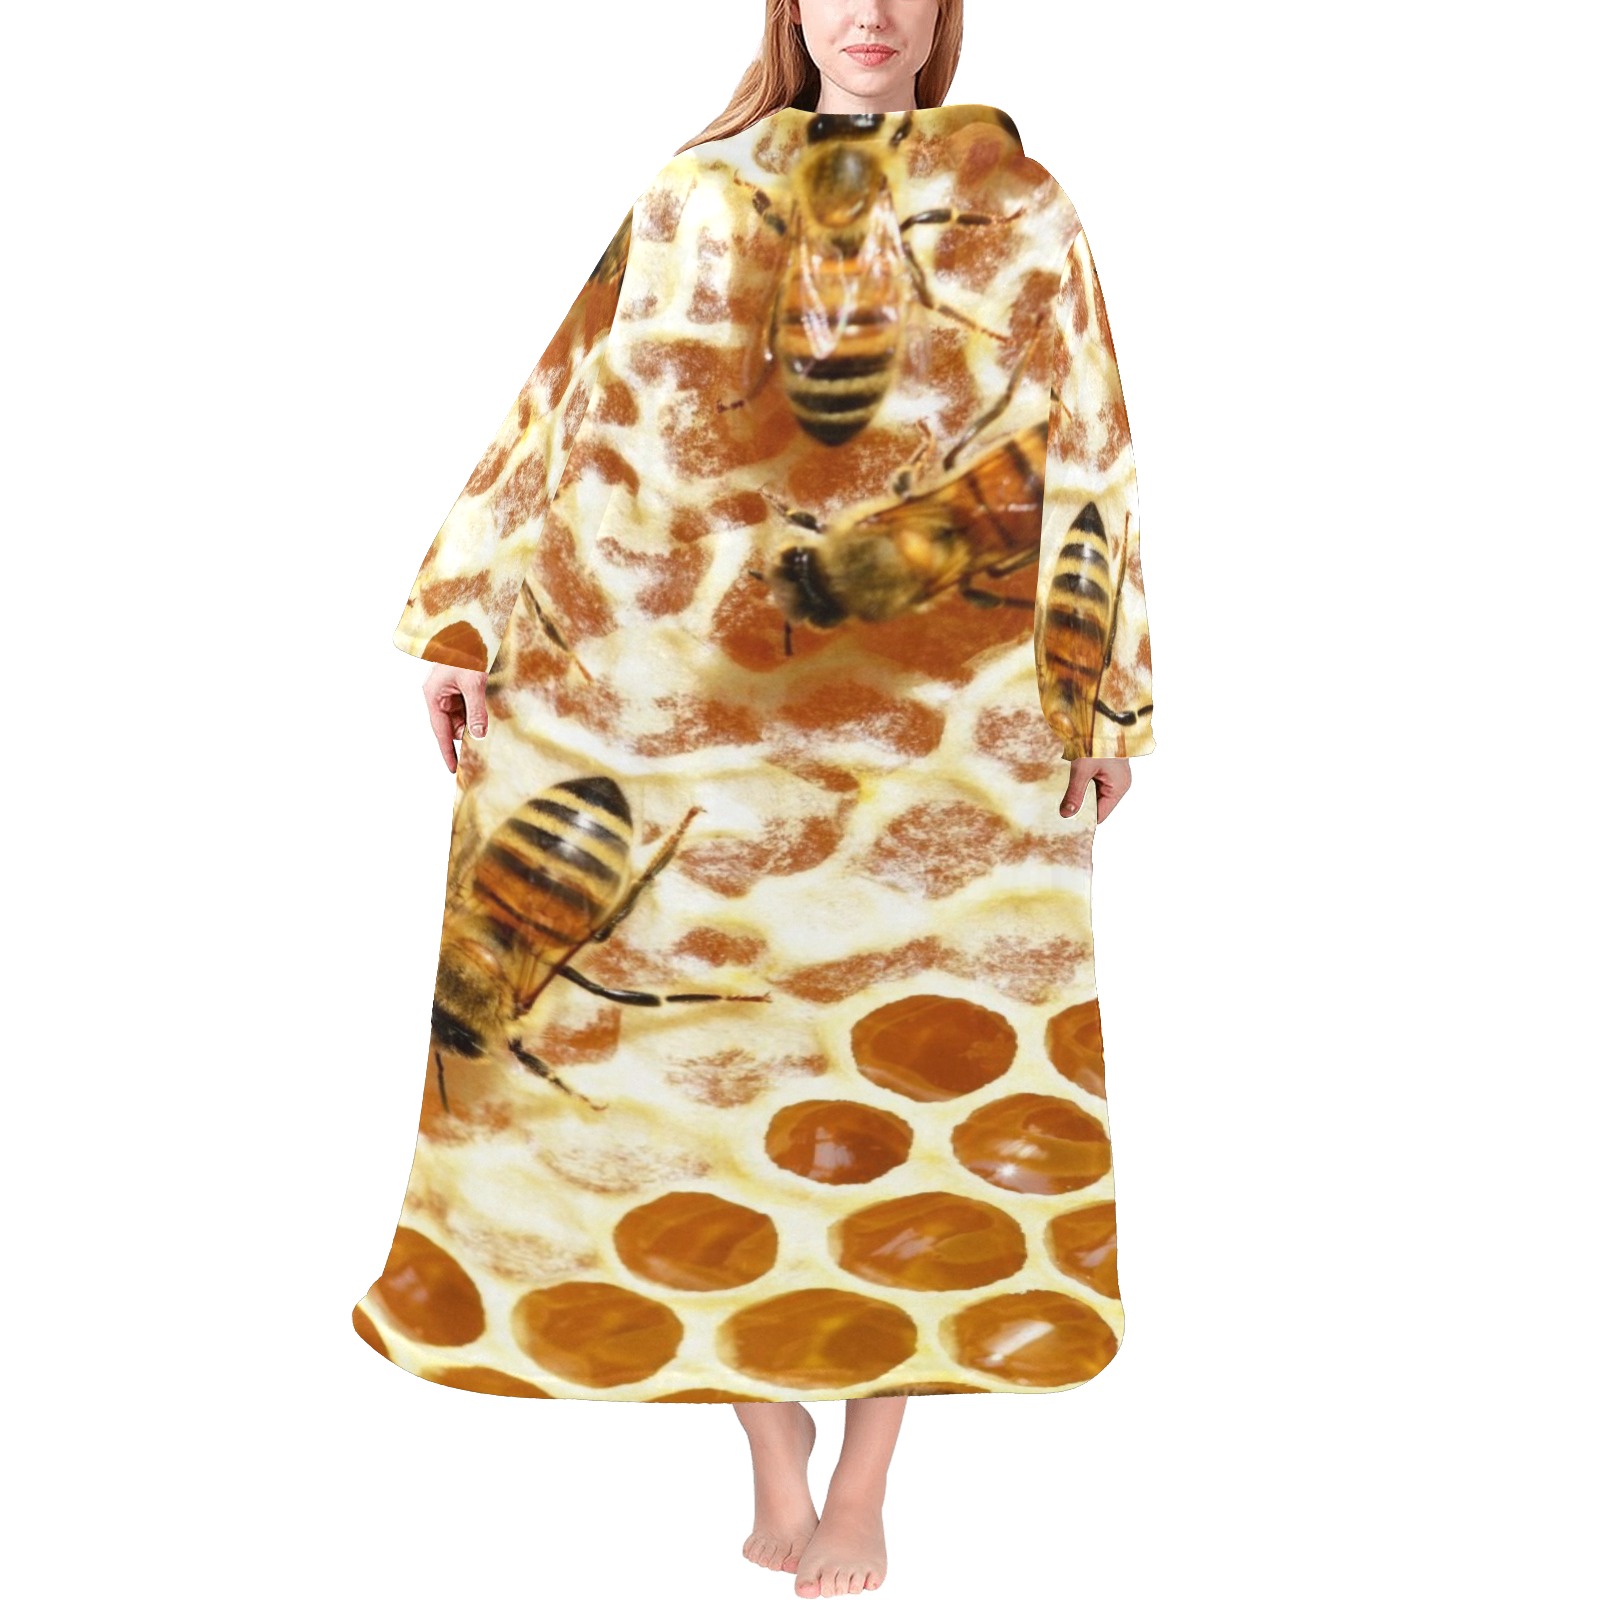 HONEY BEES 2 Blanket Robe with Sleeves for Adults